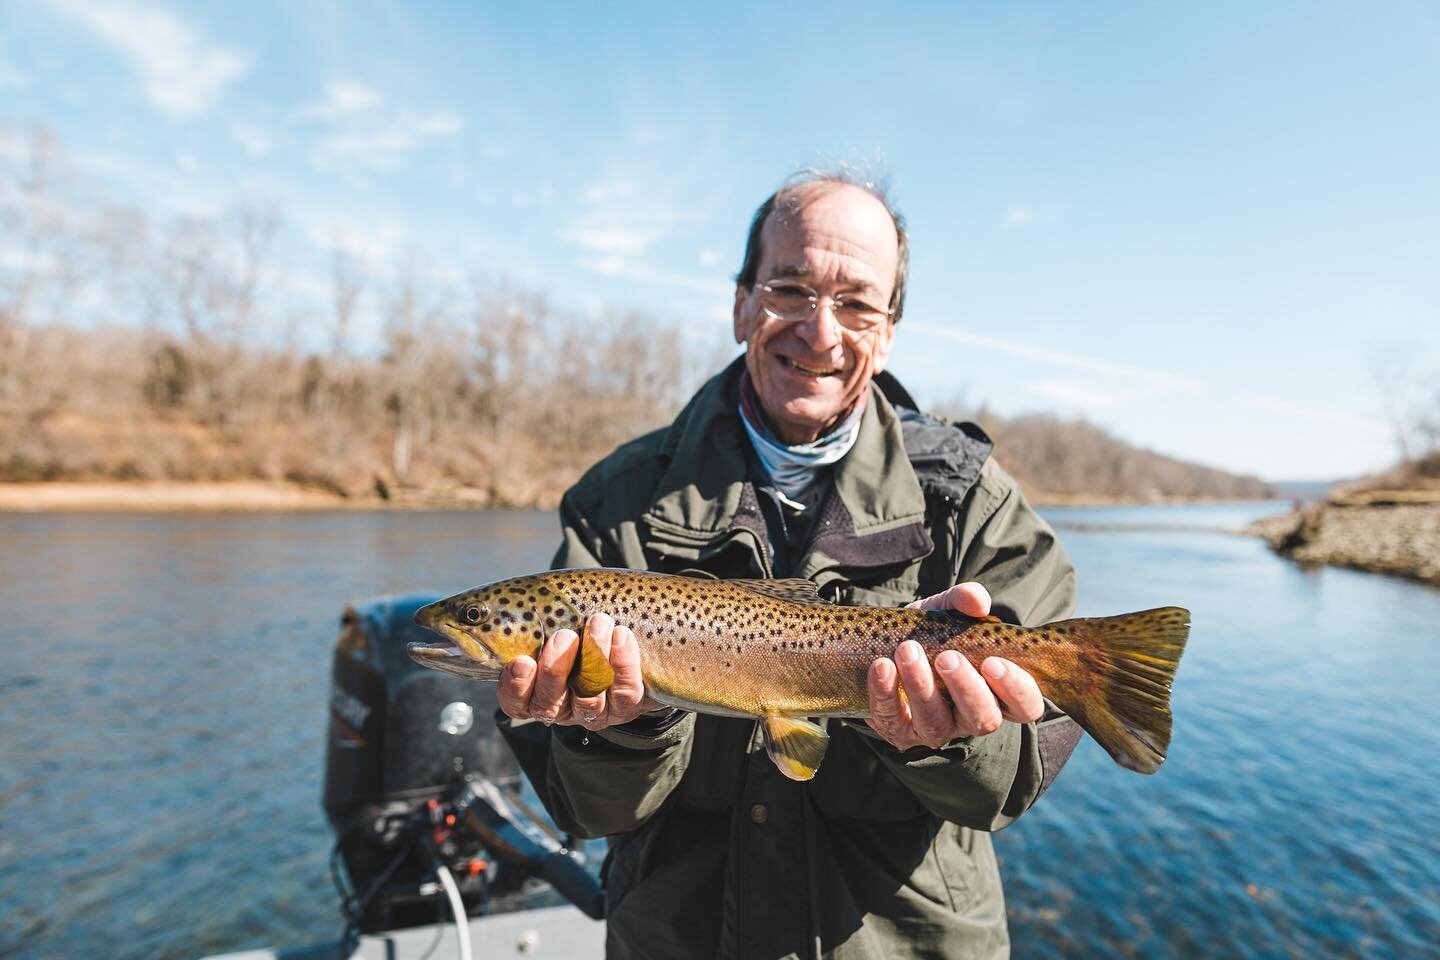 Sometimes they don&rsquo;t have to be massive to make memories. This fish fought way out of its weight class, and John did awesome landing it. It was his first quality trout, and he was shaking with buck fever after we released it. Moments like that 